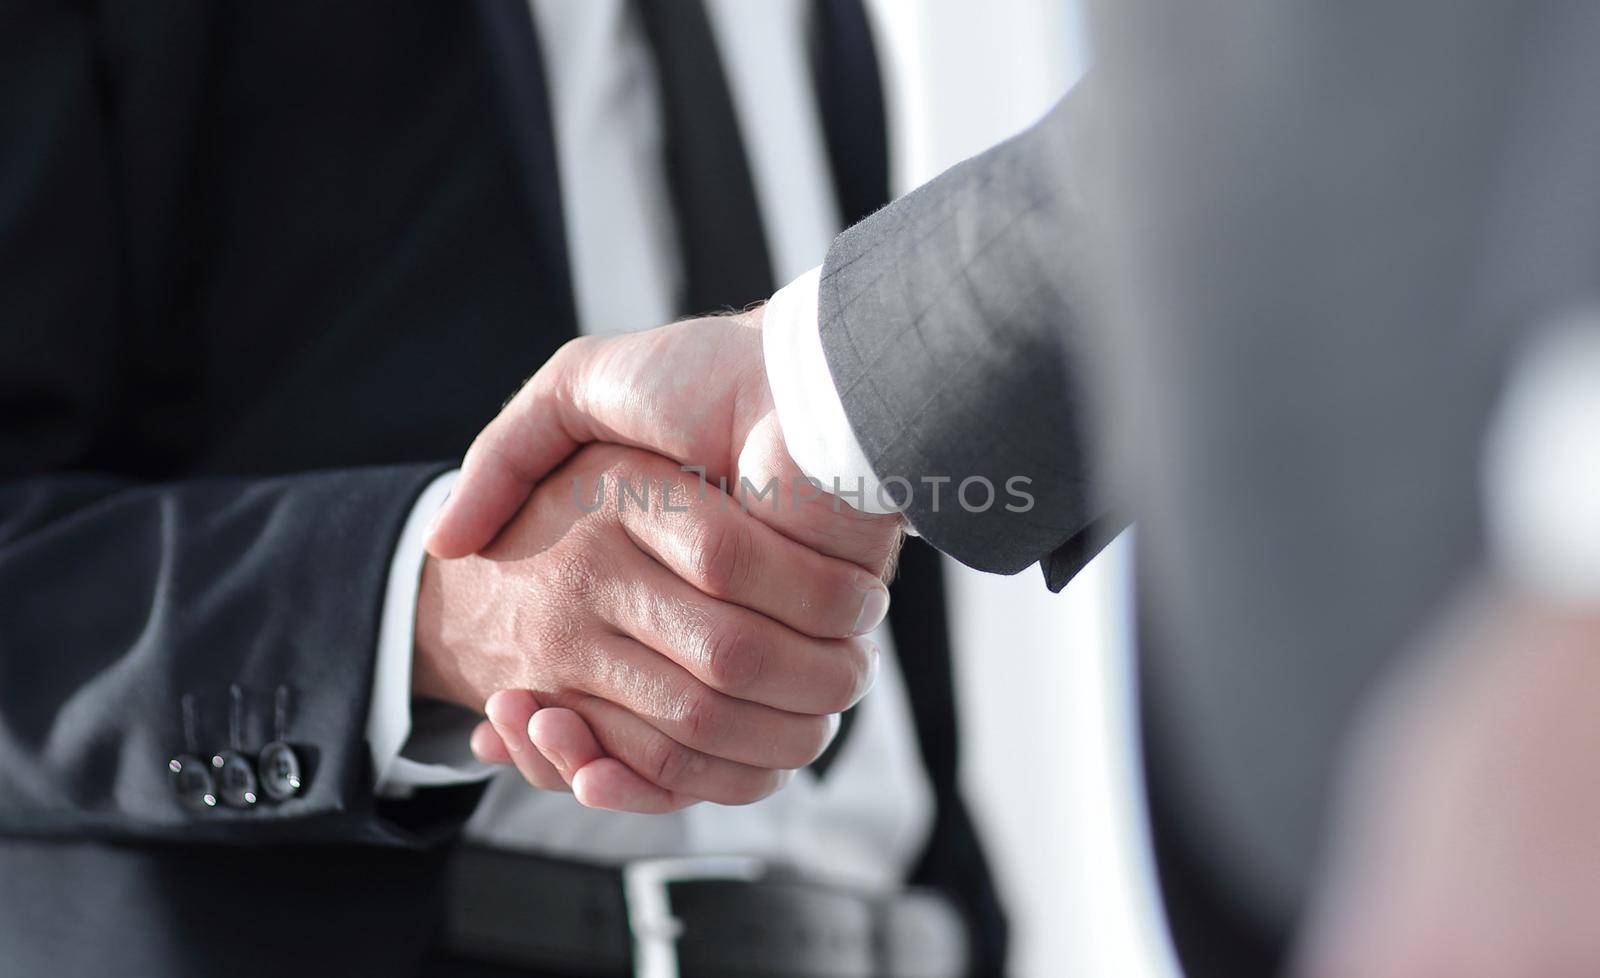 Friendly smiling businessmen handshaking. Business concept photo by asdf